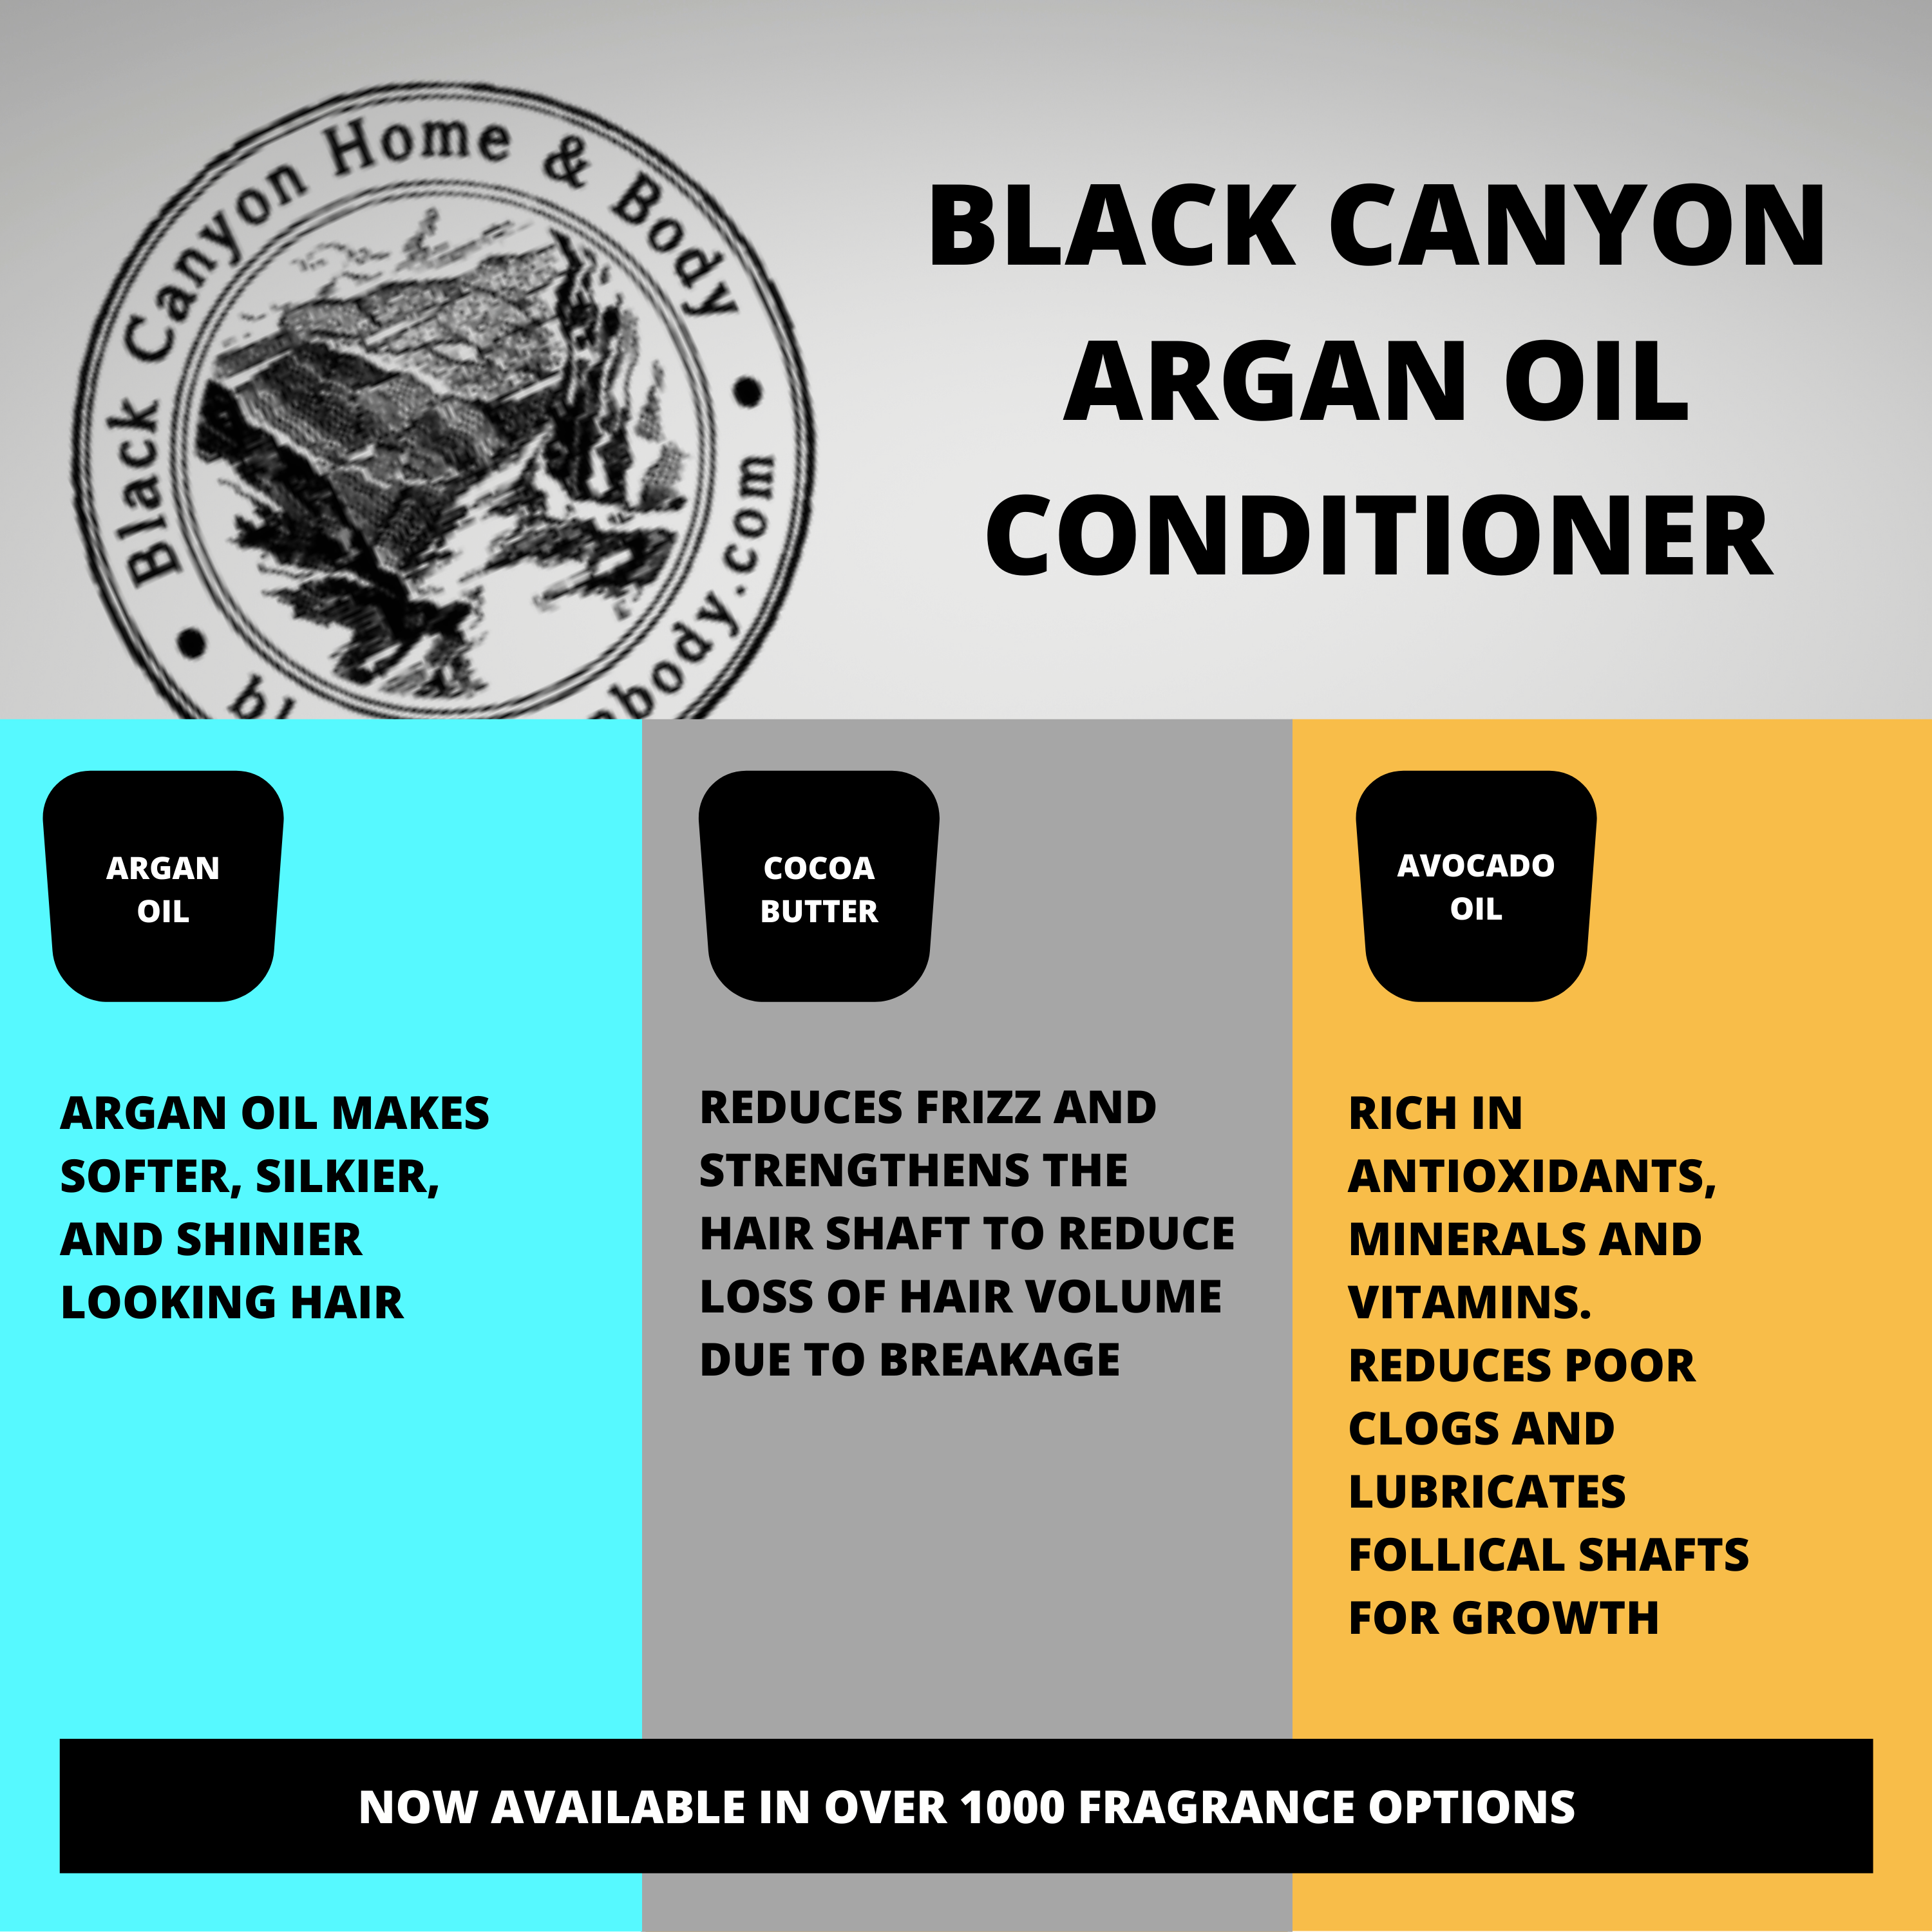 Black Canyon Easter Jelly Bean Scented Conditioner with Argan Oil